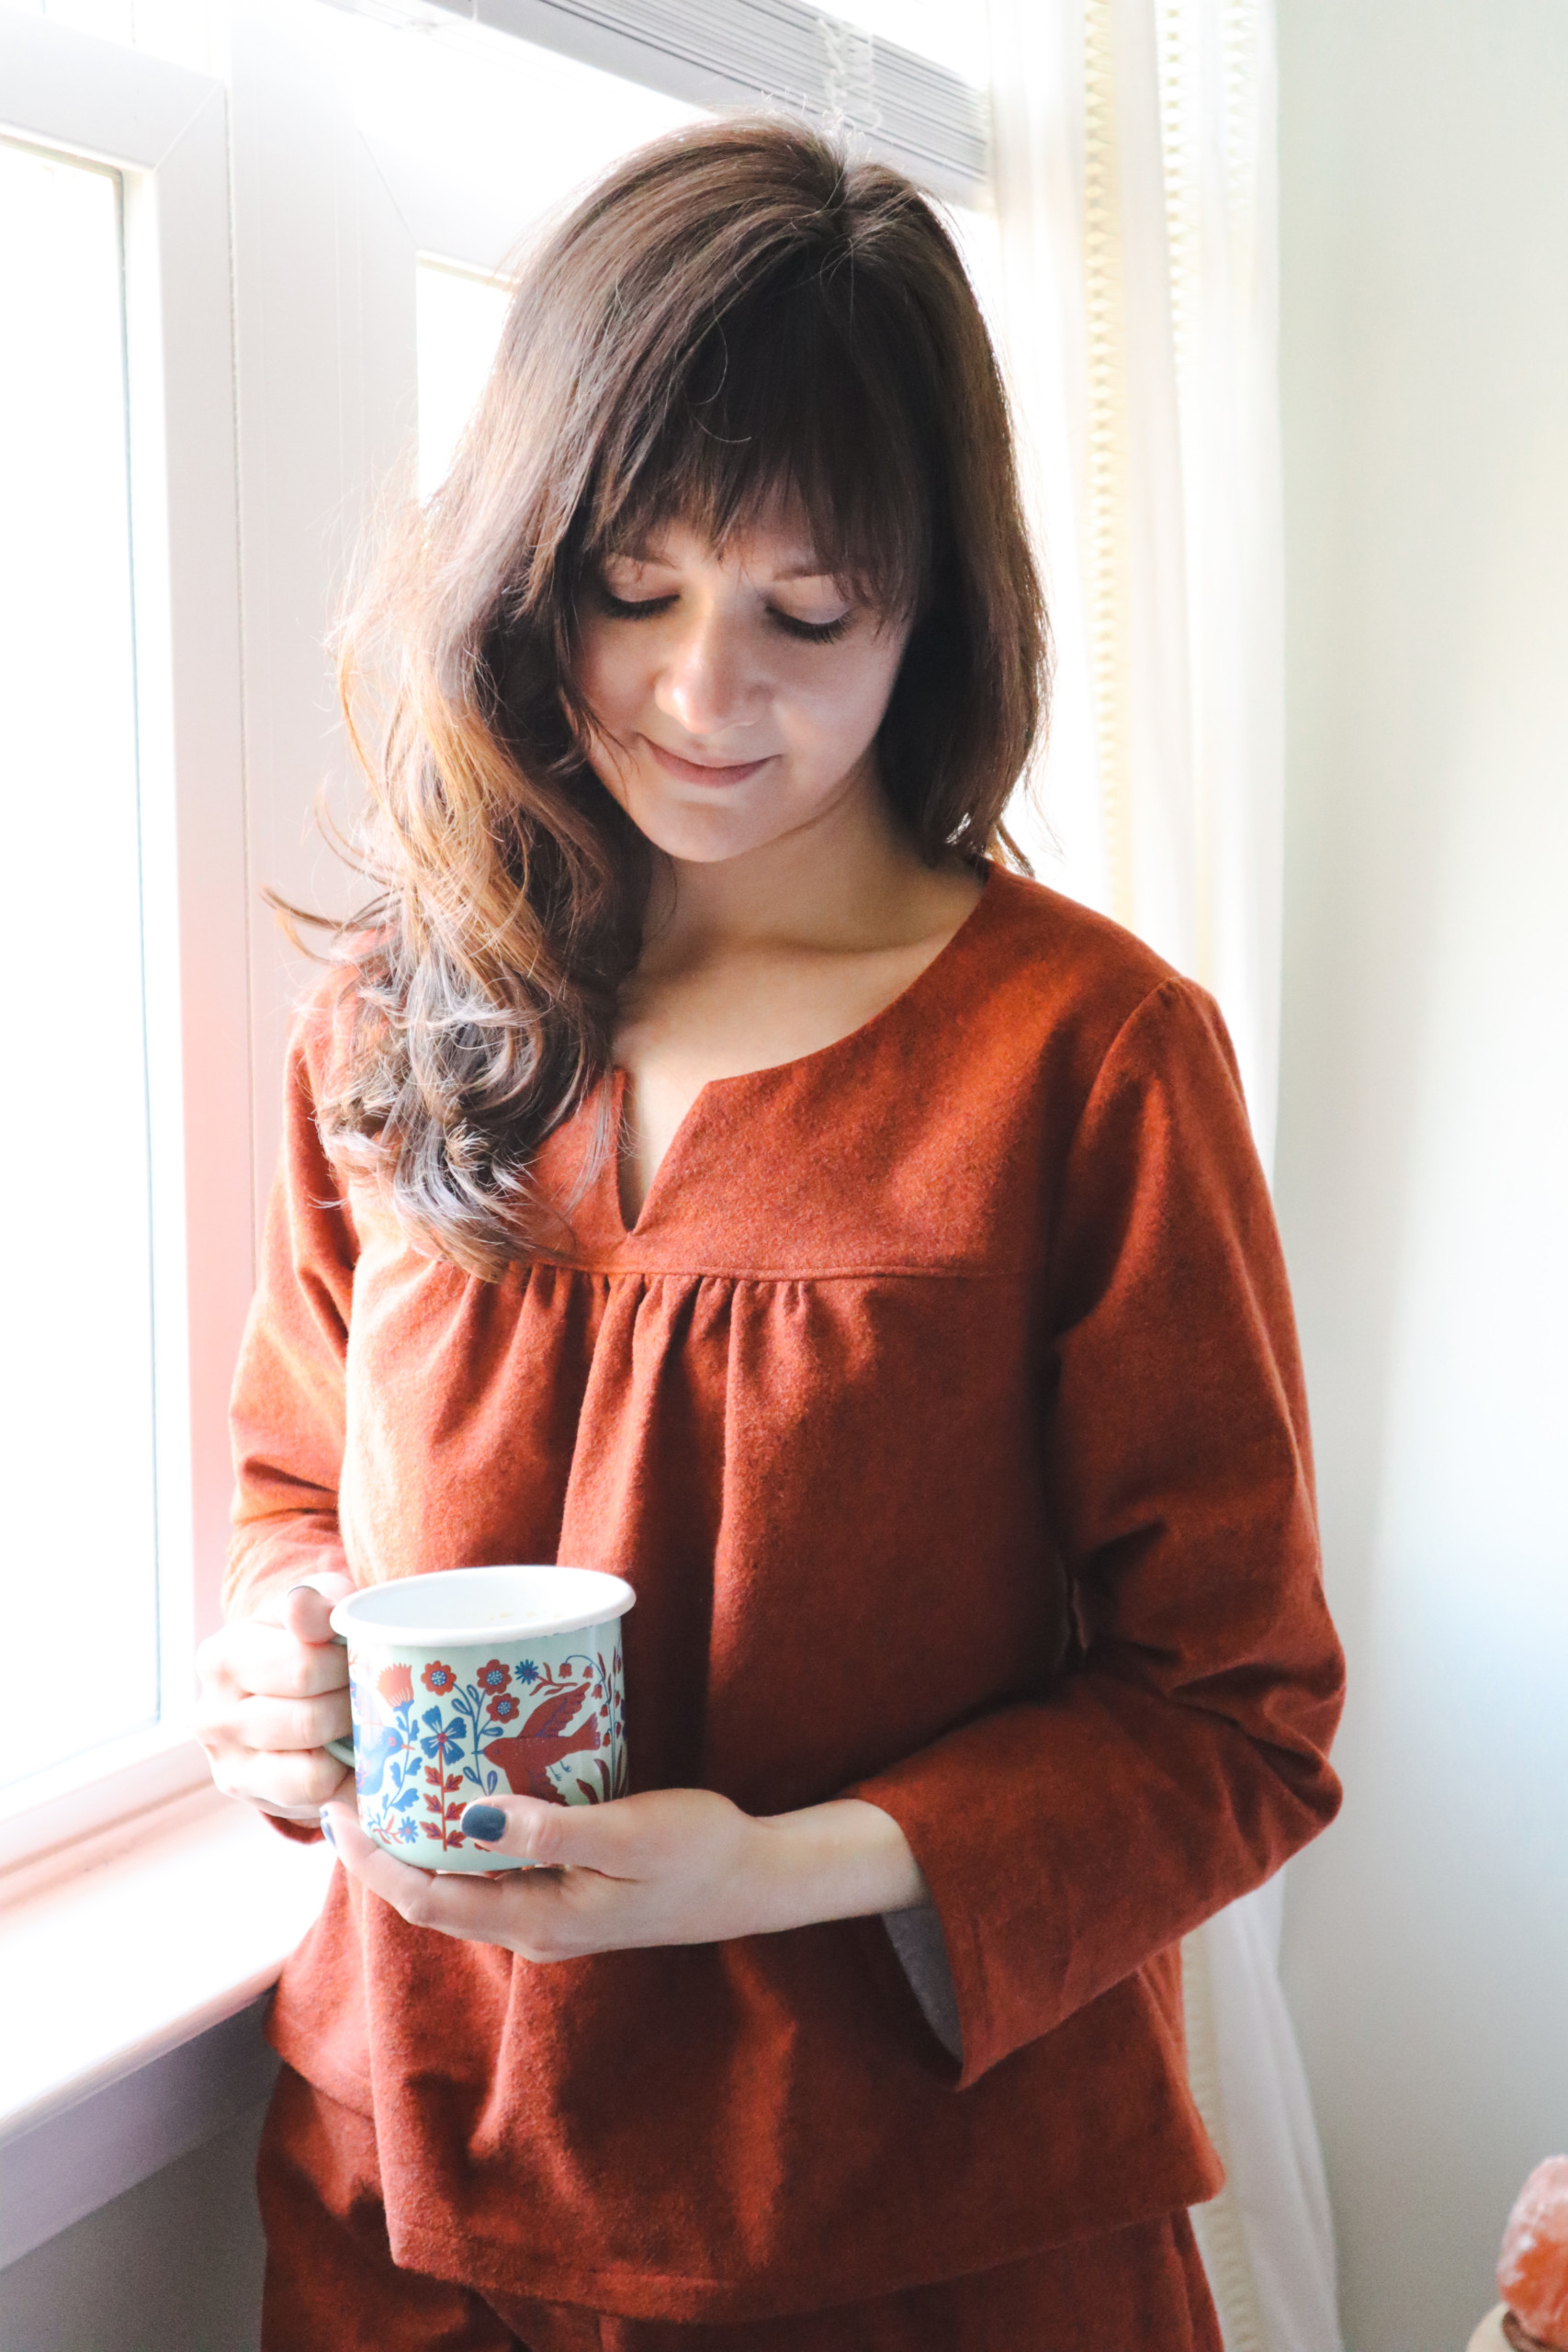 Meredith stands by a window wearing a red flannel nocturne top and holding a mug of coffee